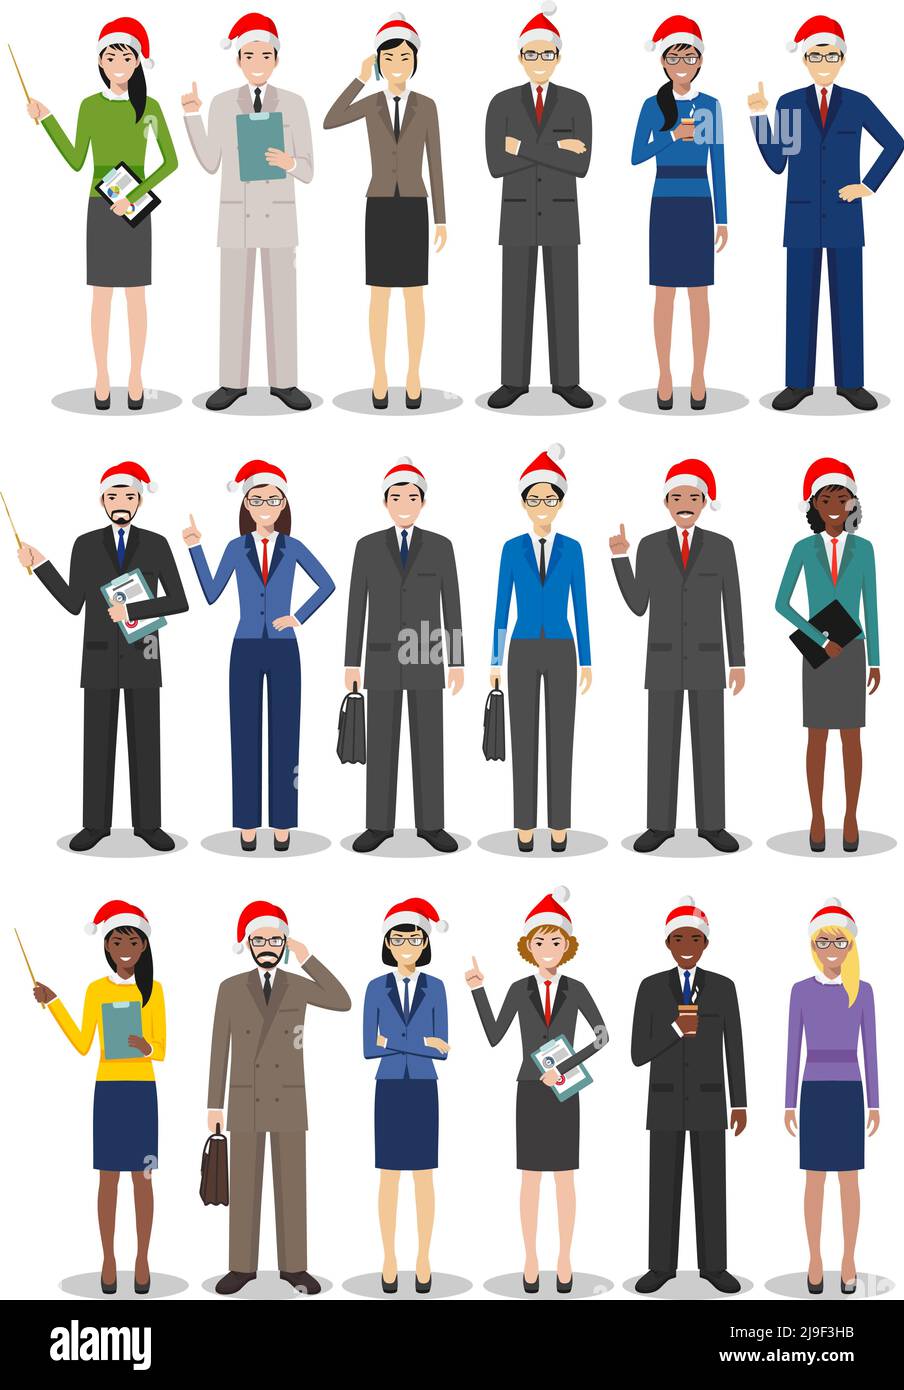 Set of diverse business people standing together in Santa Claus hats in flat style on white background. Different nationalities and dress styles. Cute Stock Vector